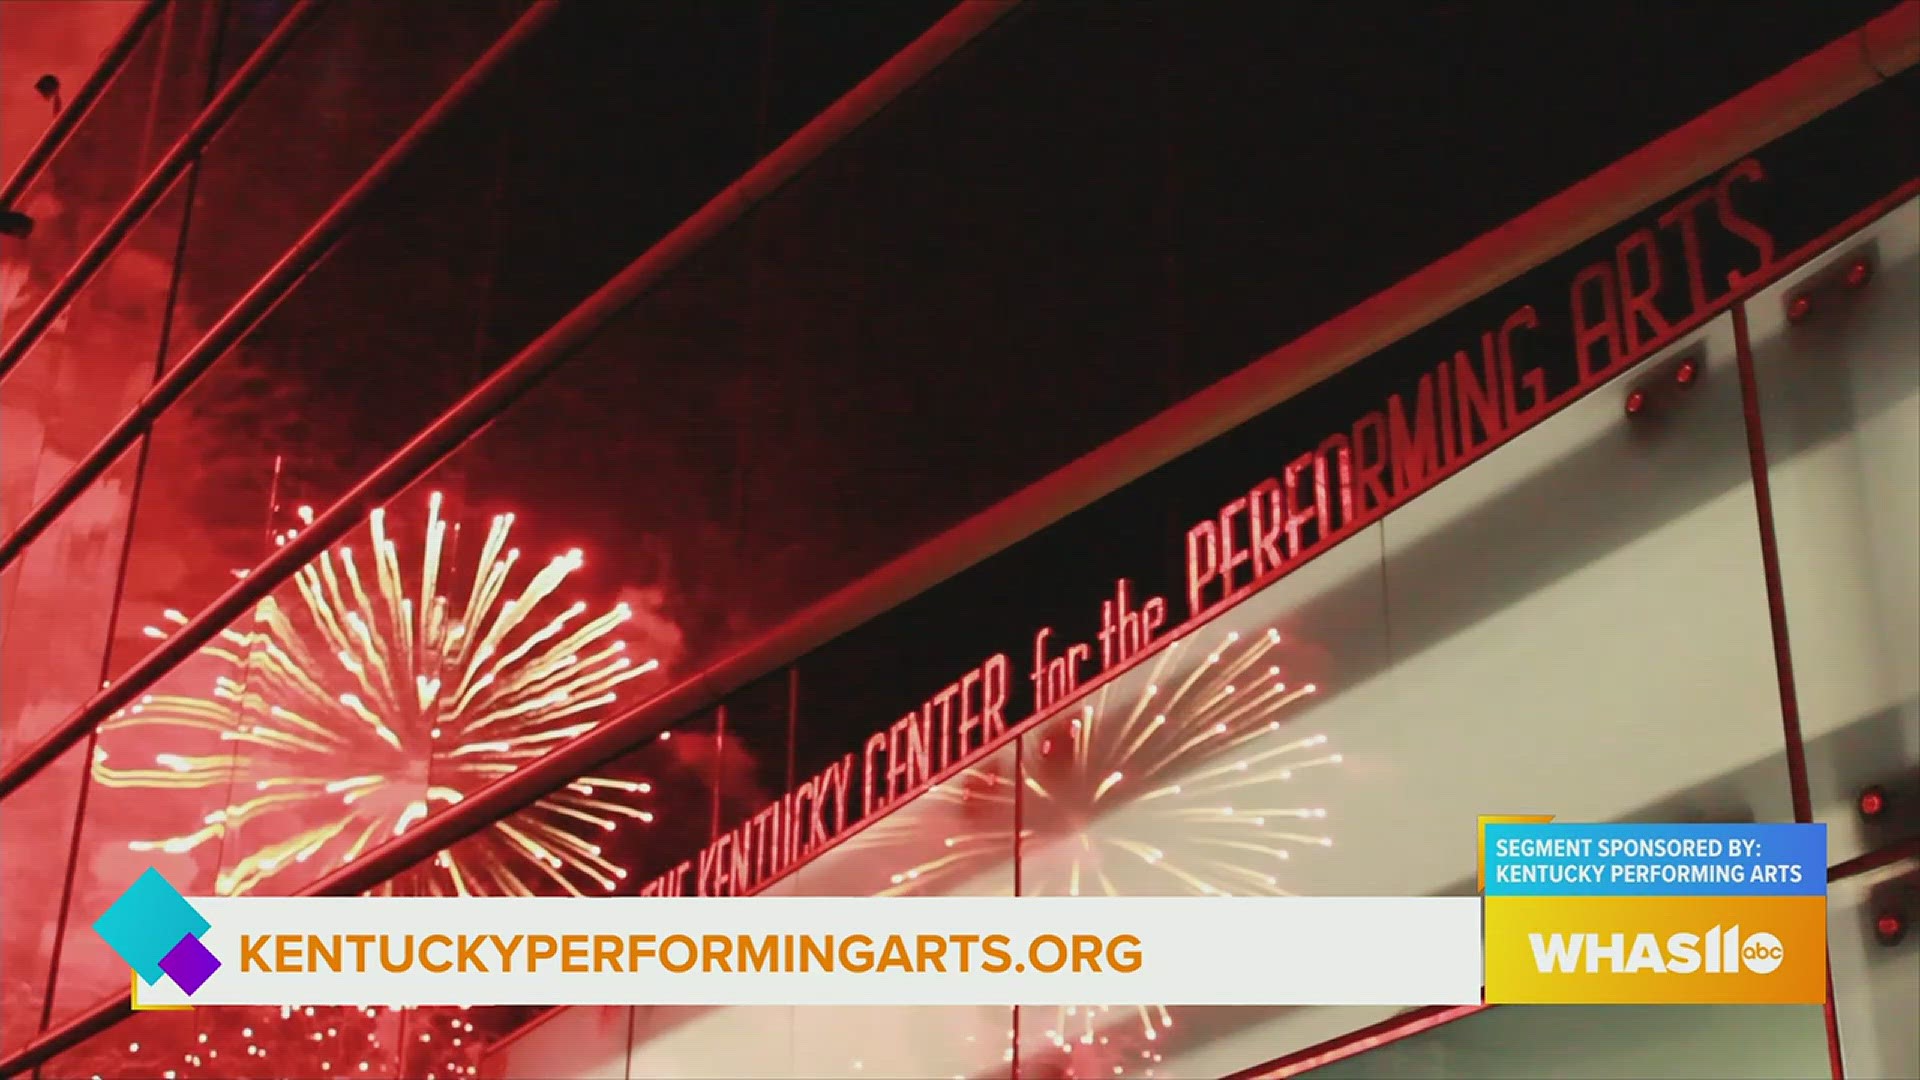 As Thunder over Louisville kicks off this weekend, you can see a great view at the Kentucky Performing Arts Center.